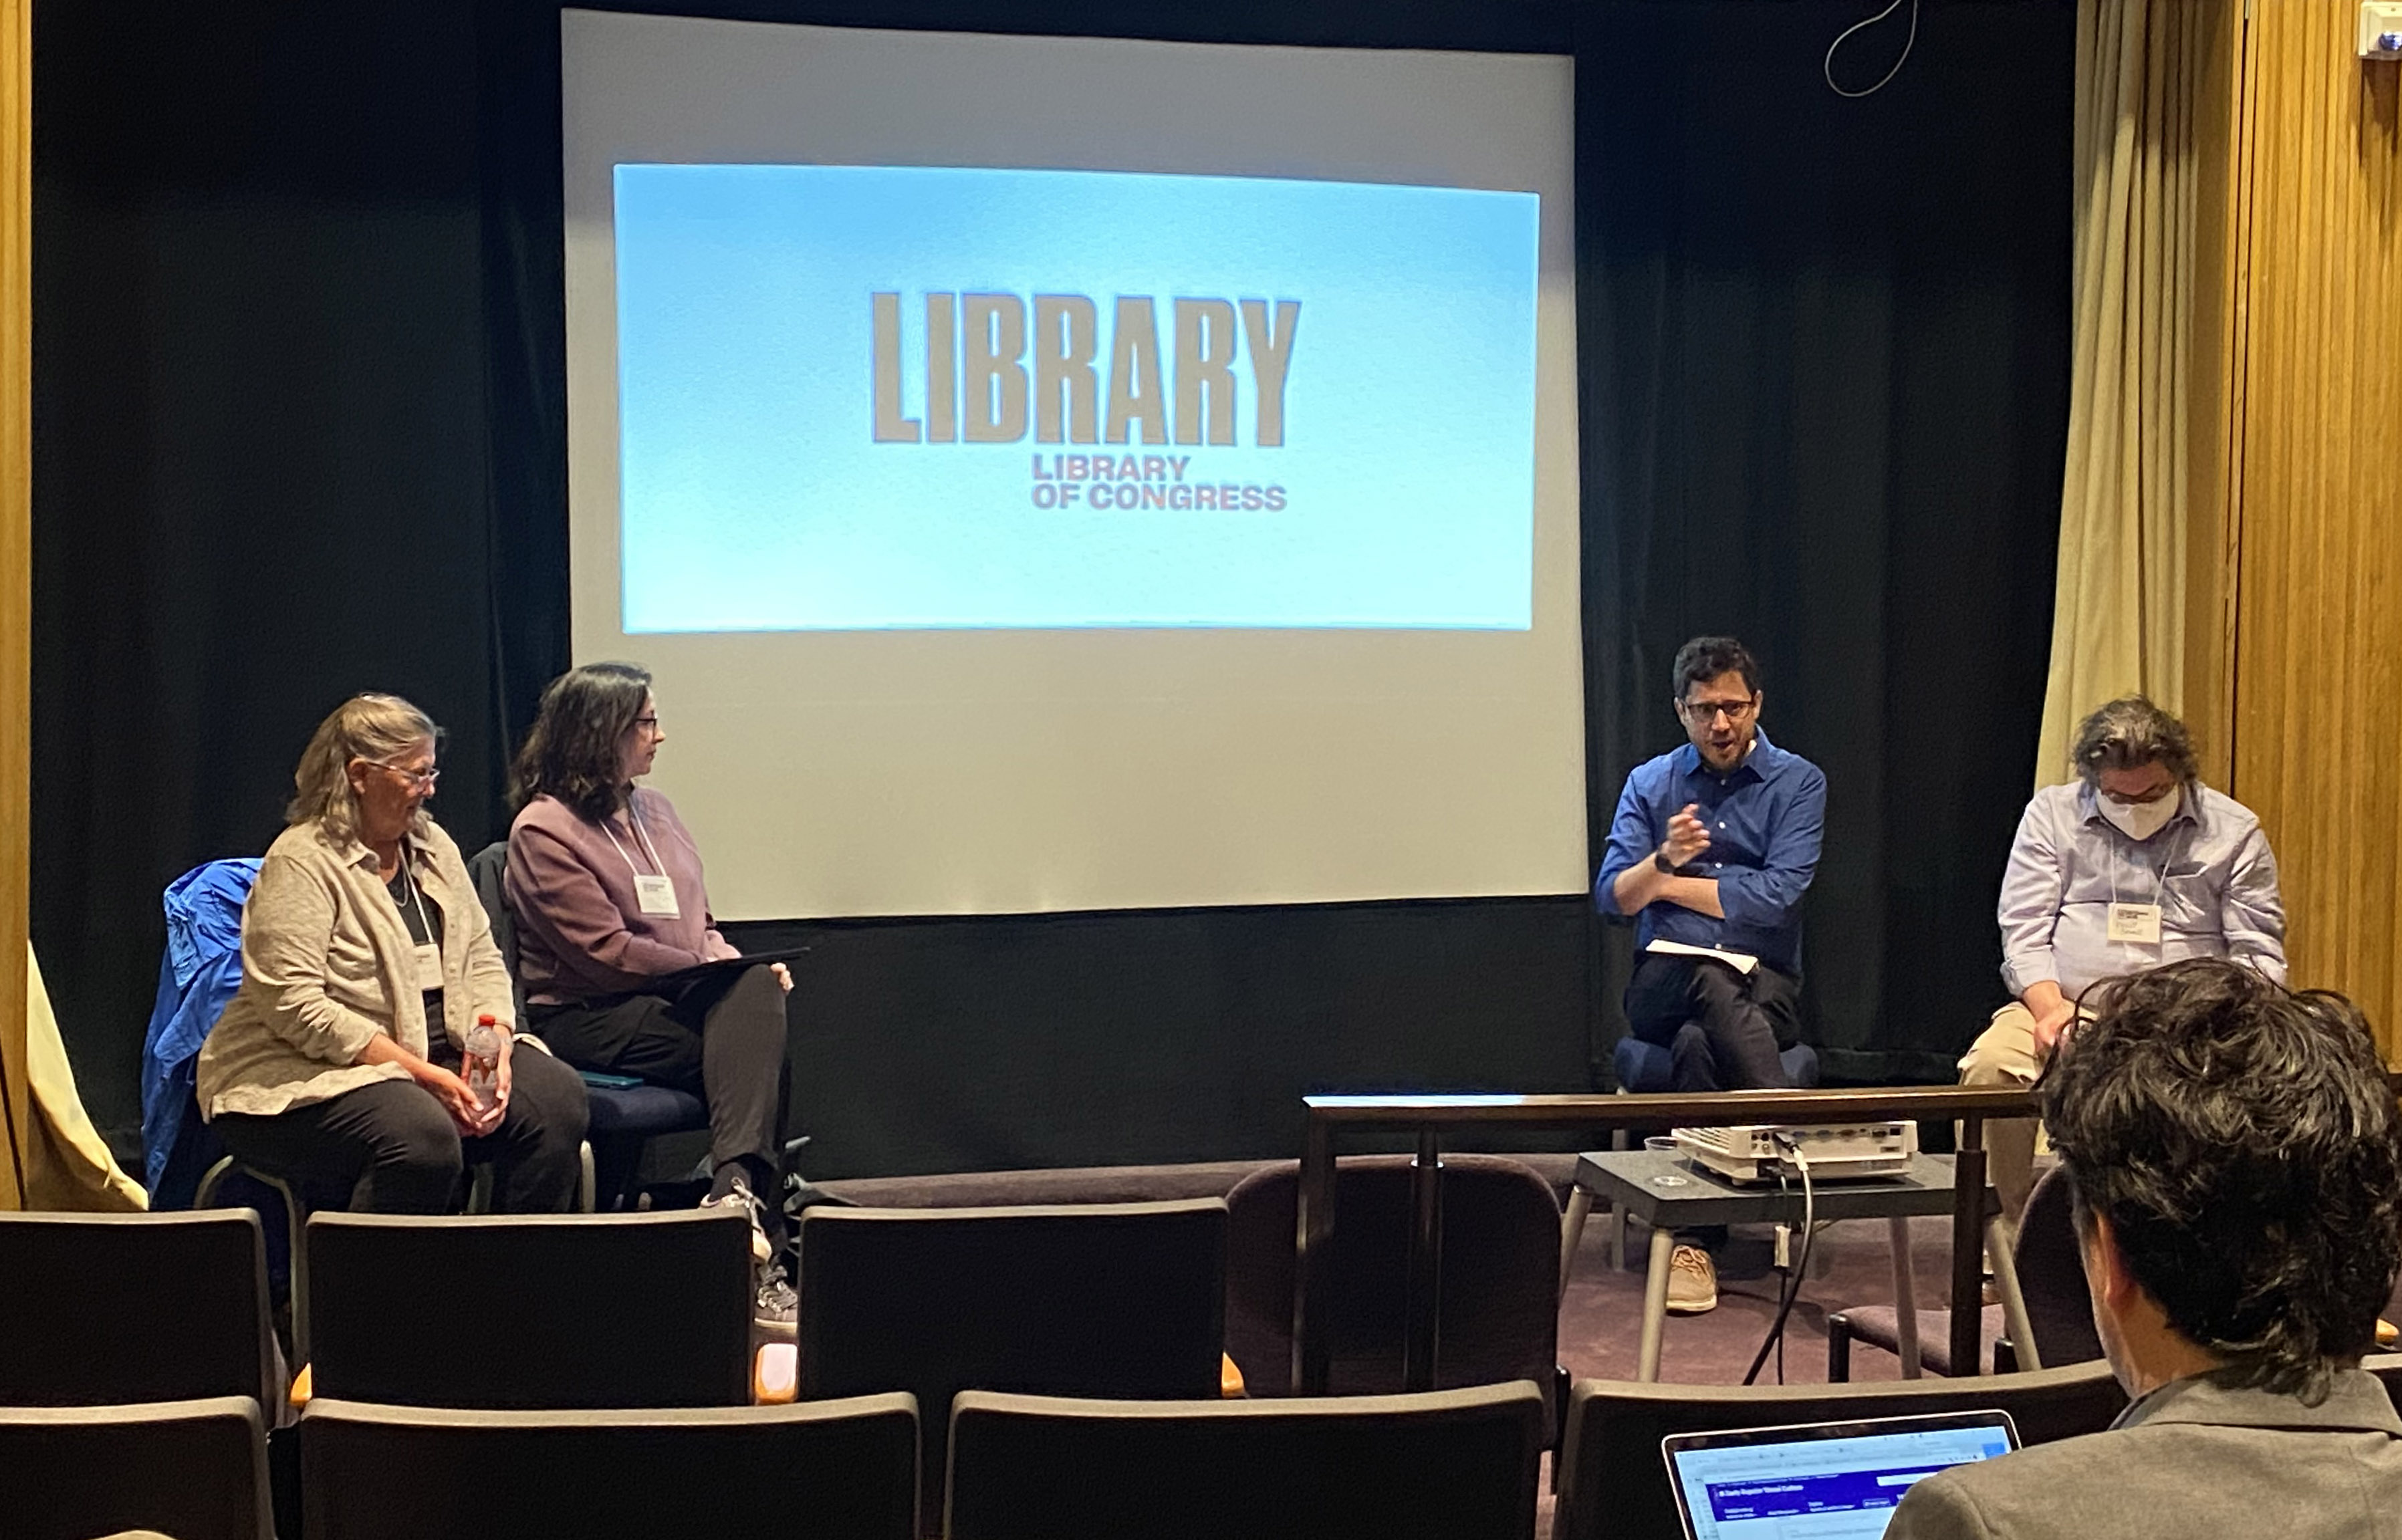 A photo of four people seated at the front of a theater for a panel discussion. The screen displays the logo for the Library of Congress